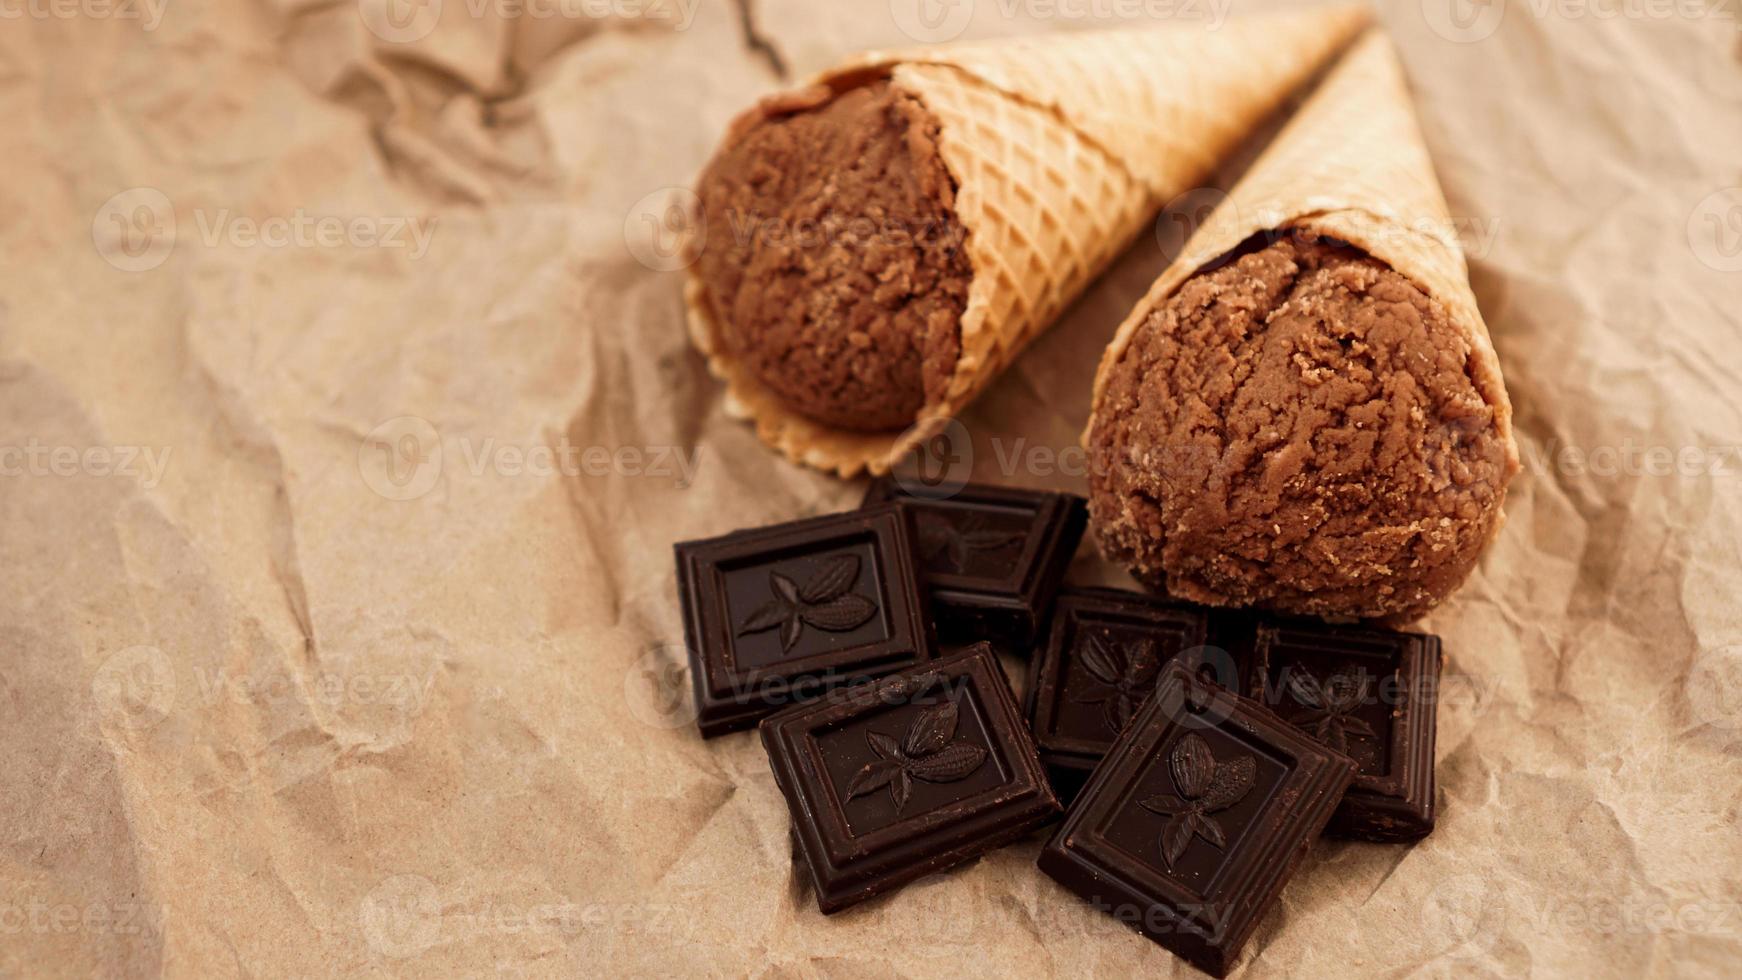 Chocolate ice cream in a waffle cone on craft paper photo